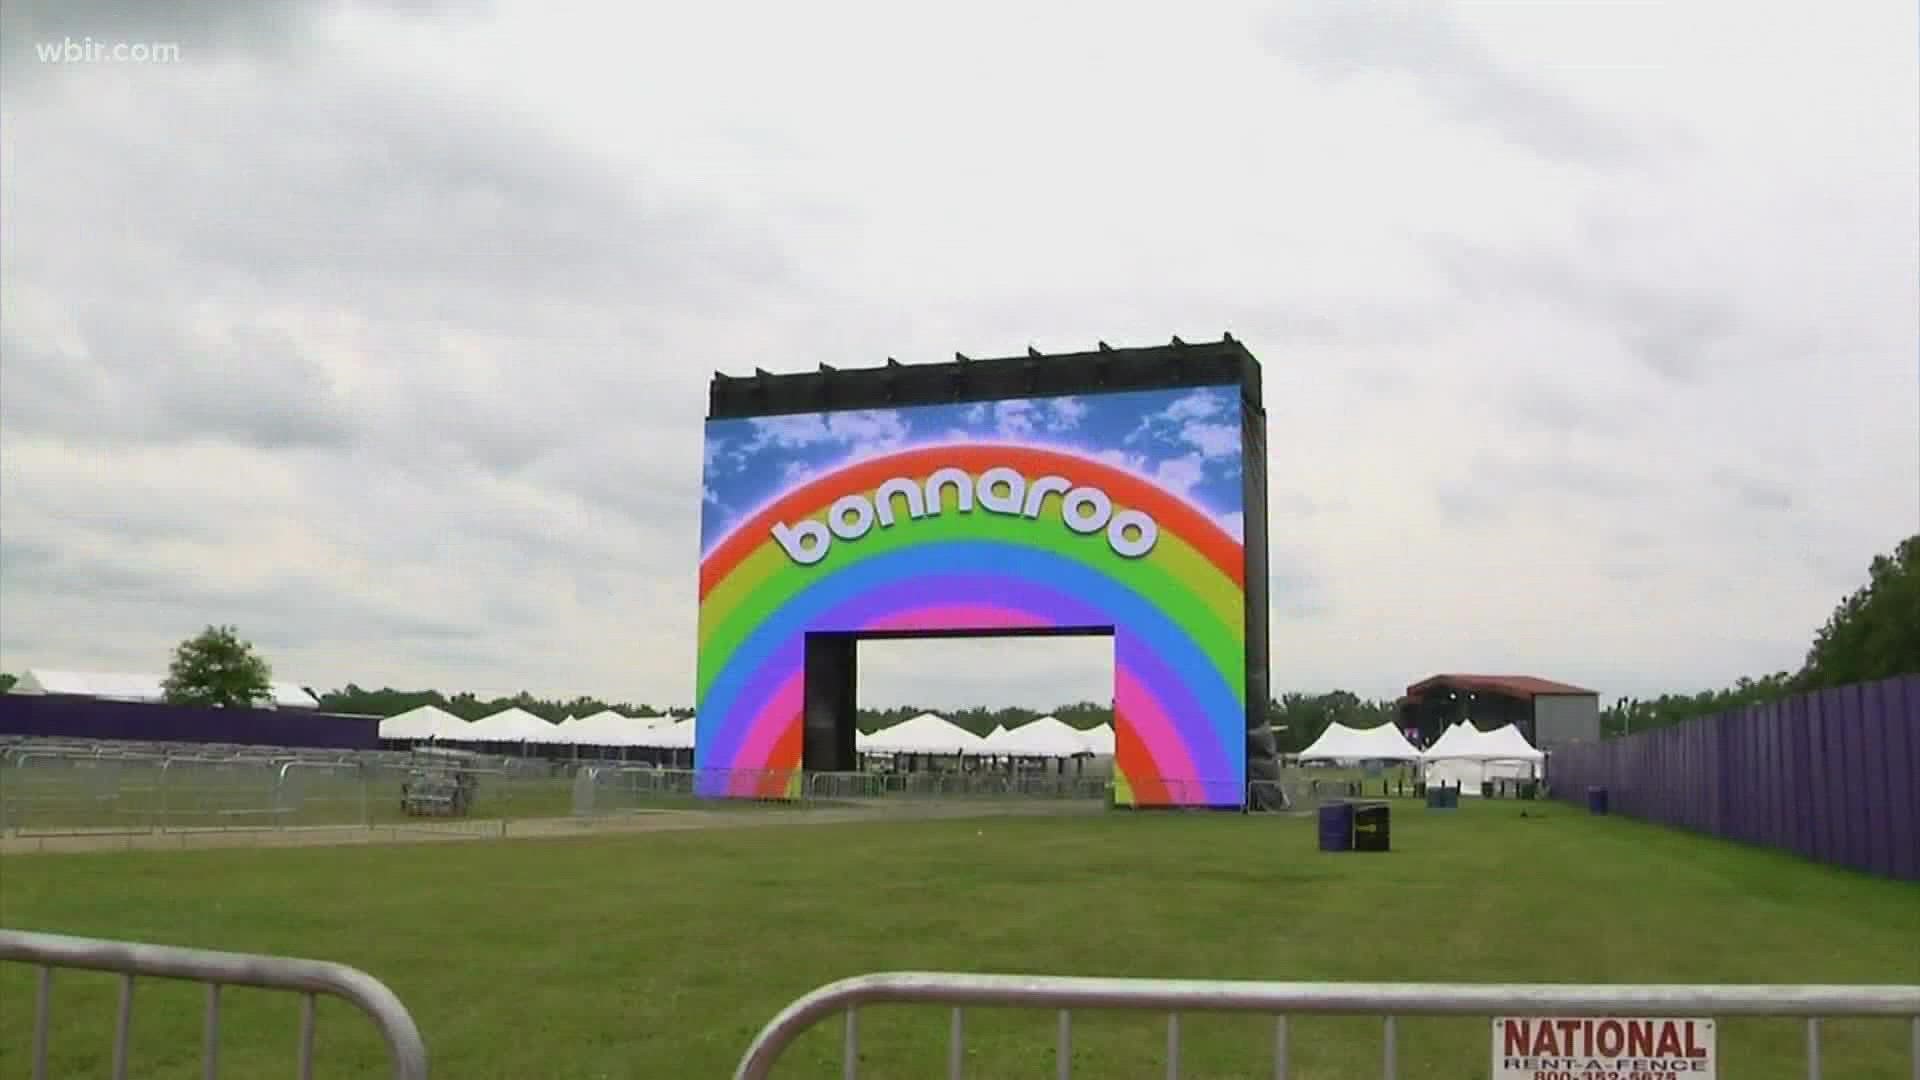 Organizers announced Tuesday afternoon they had to cancel Bonnaroo Music and Arts Festival due to flooding across the festival grounds.